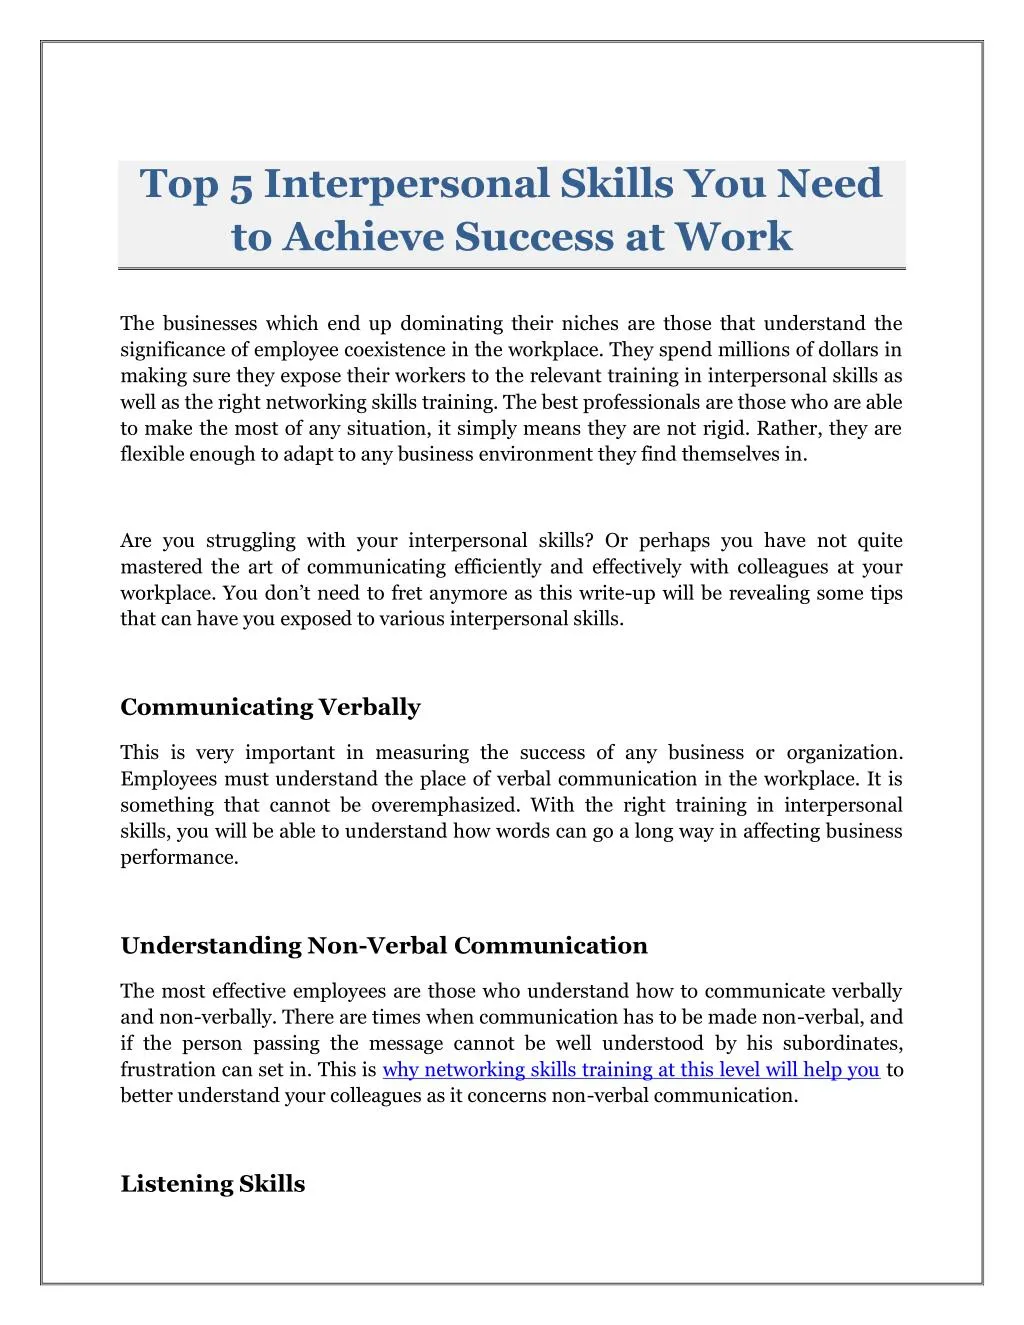 top 5 interpersonal skills you need to achieve